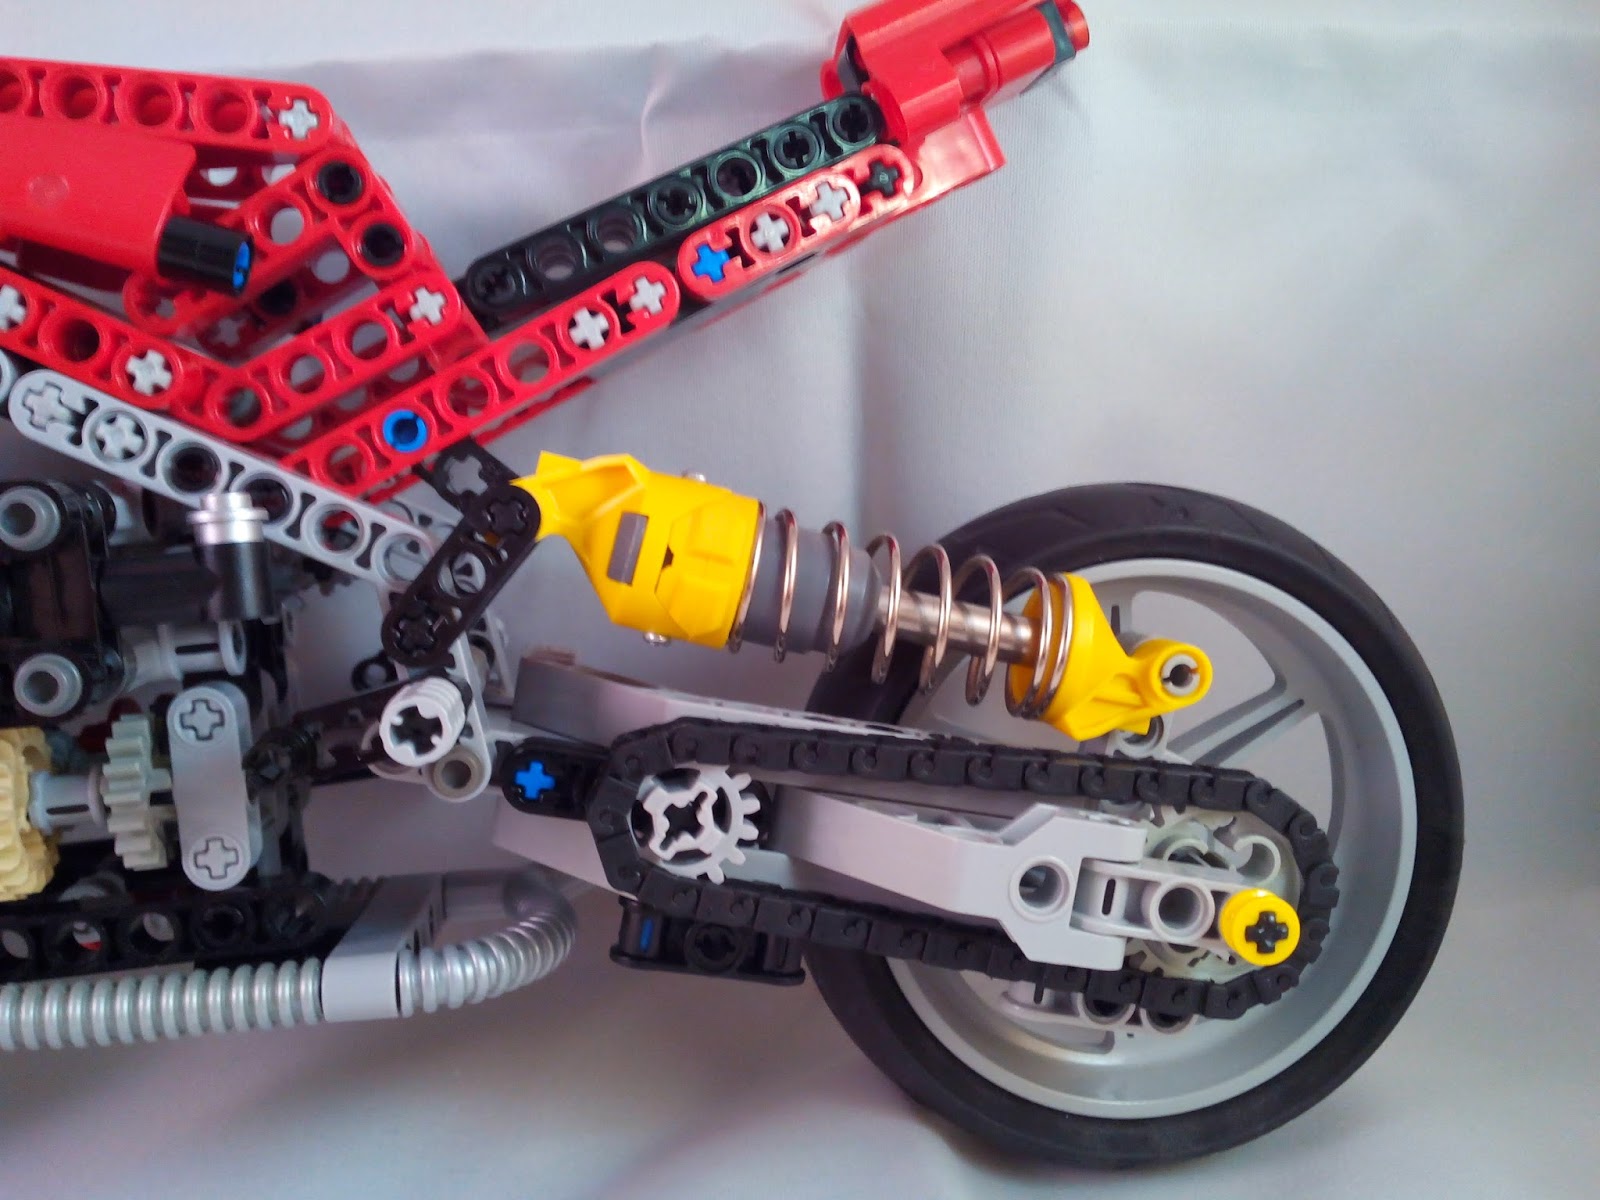 LEGO TECHNIC MOTORCYCLES: Contest Results - 8420 MOD - 1st place by NEMMOZ